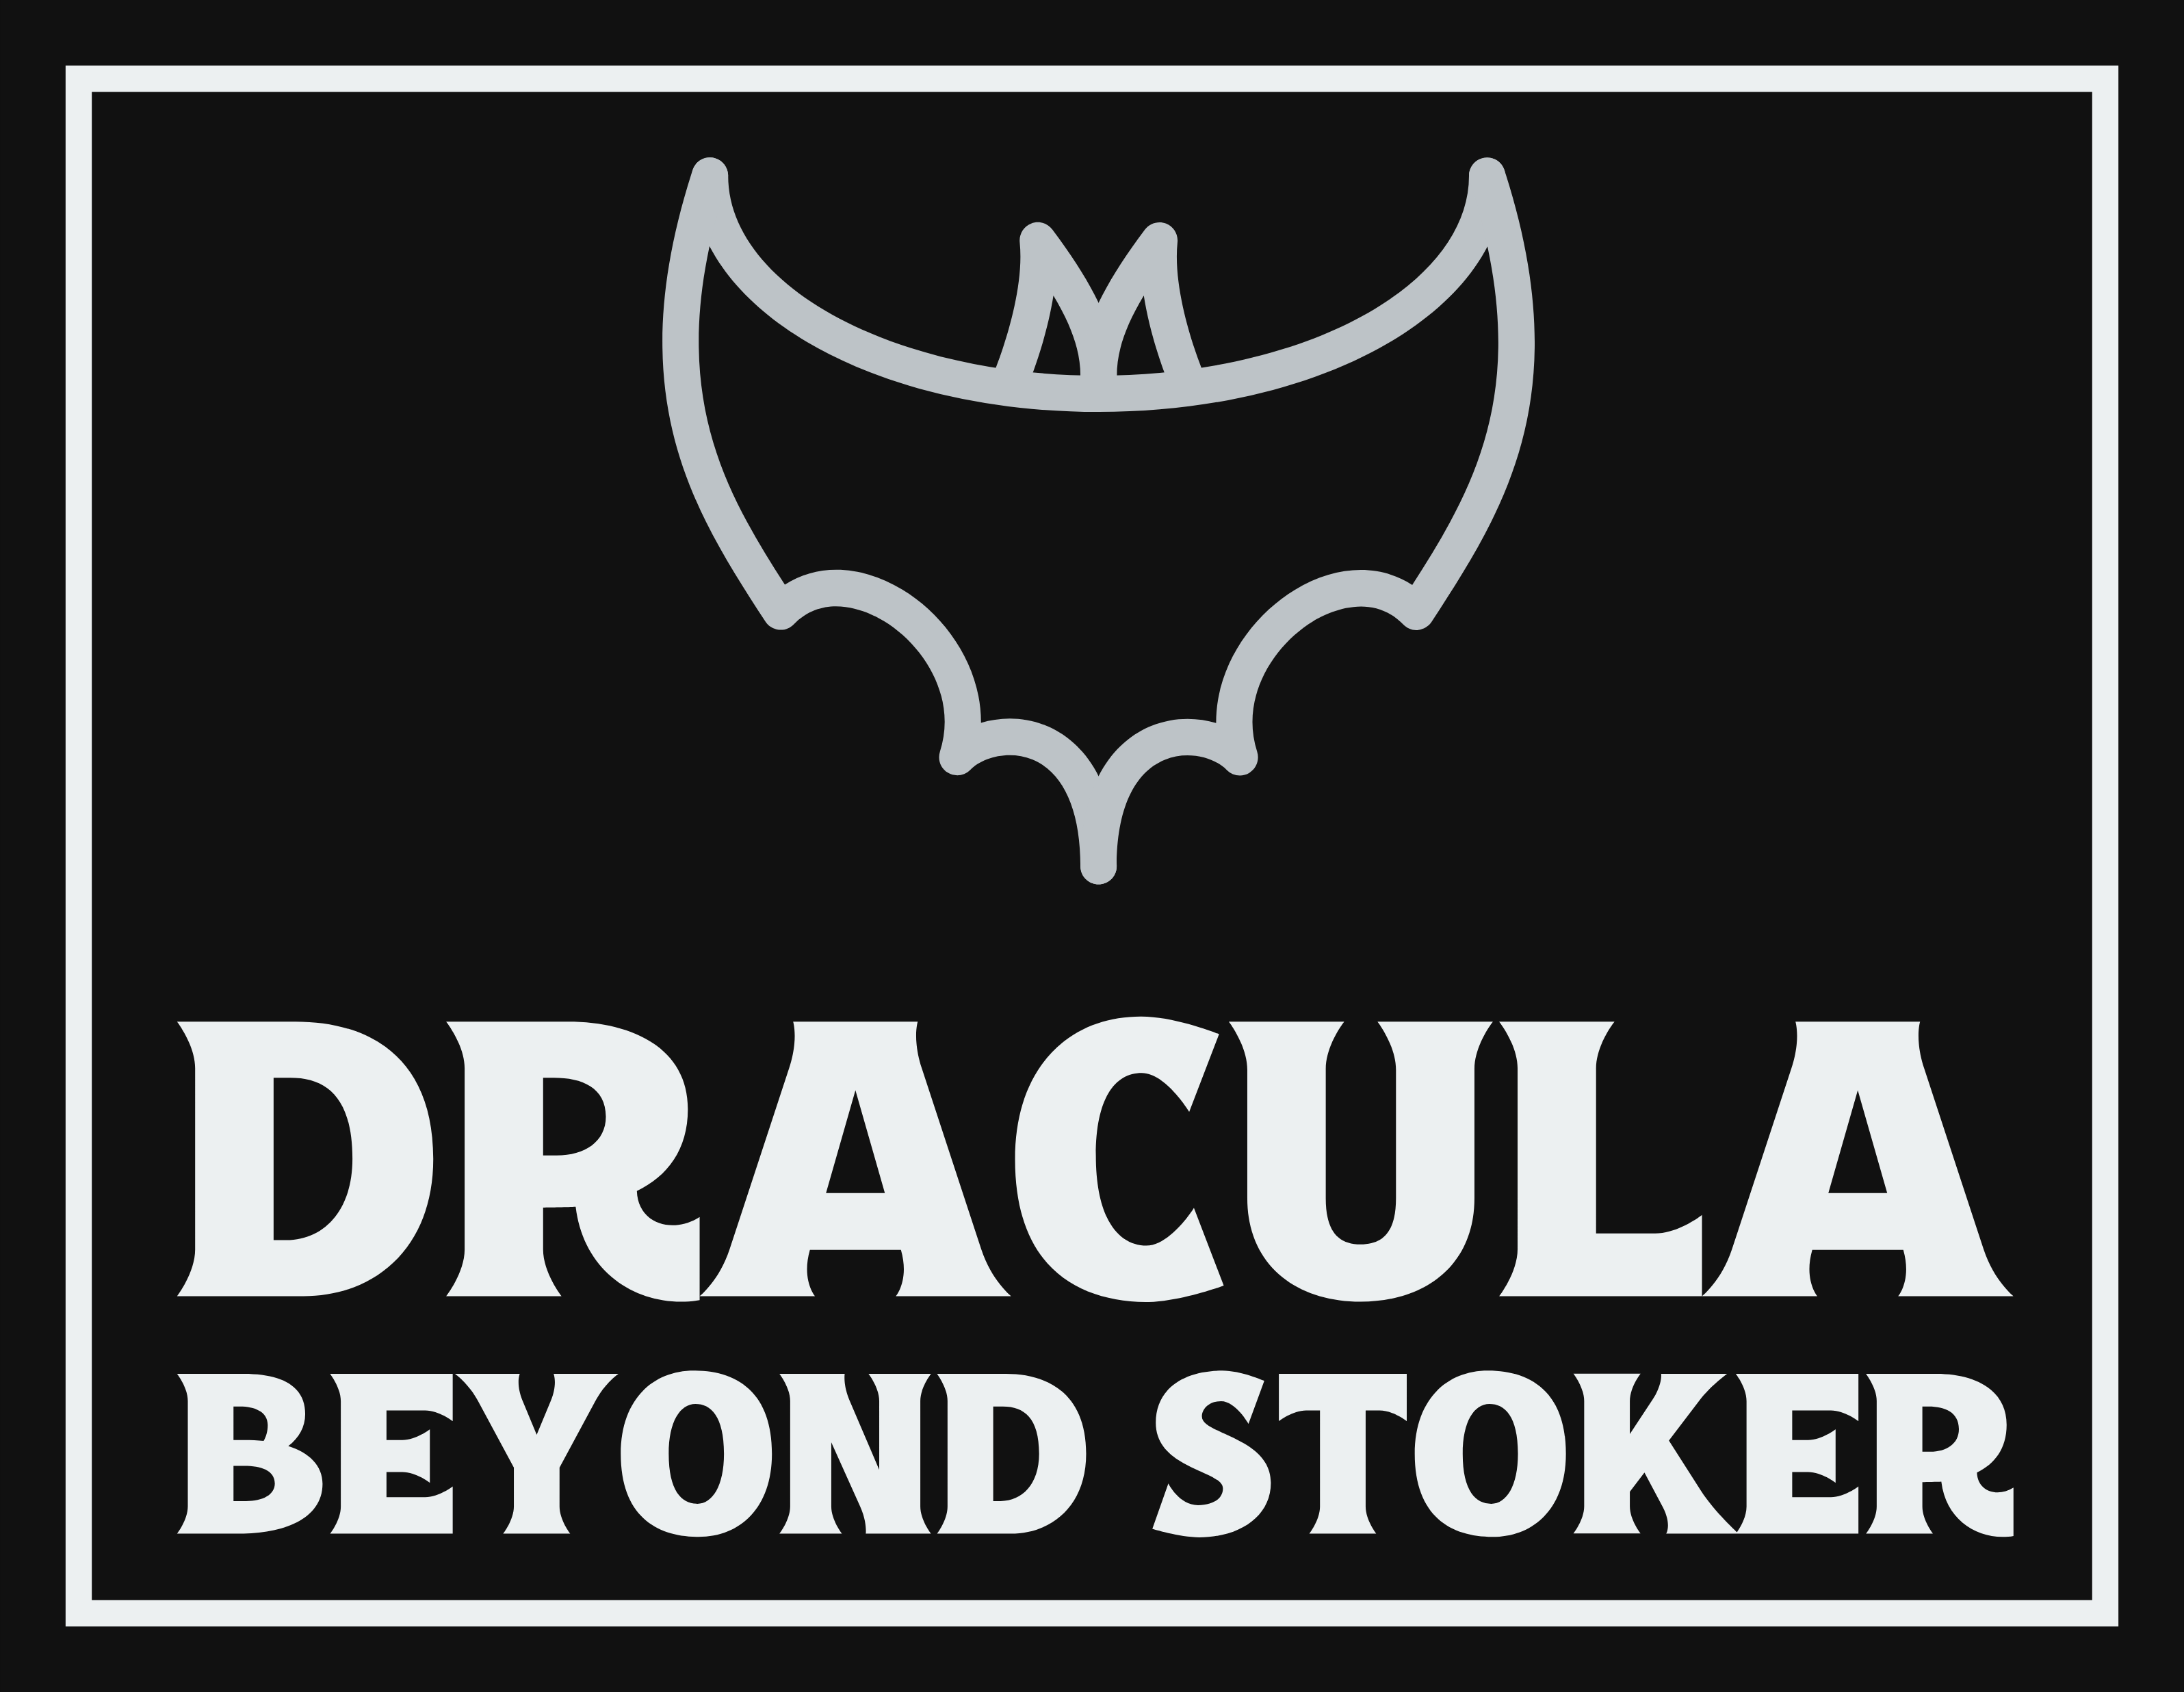 Dracula, or the Undead